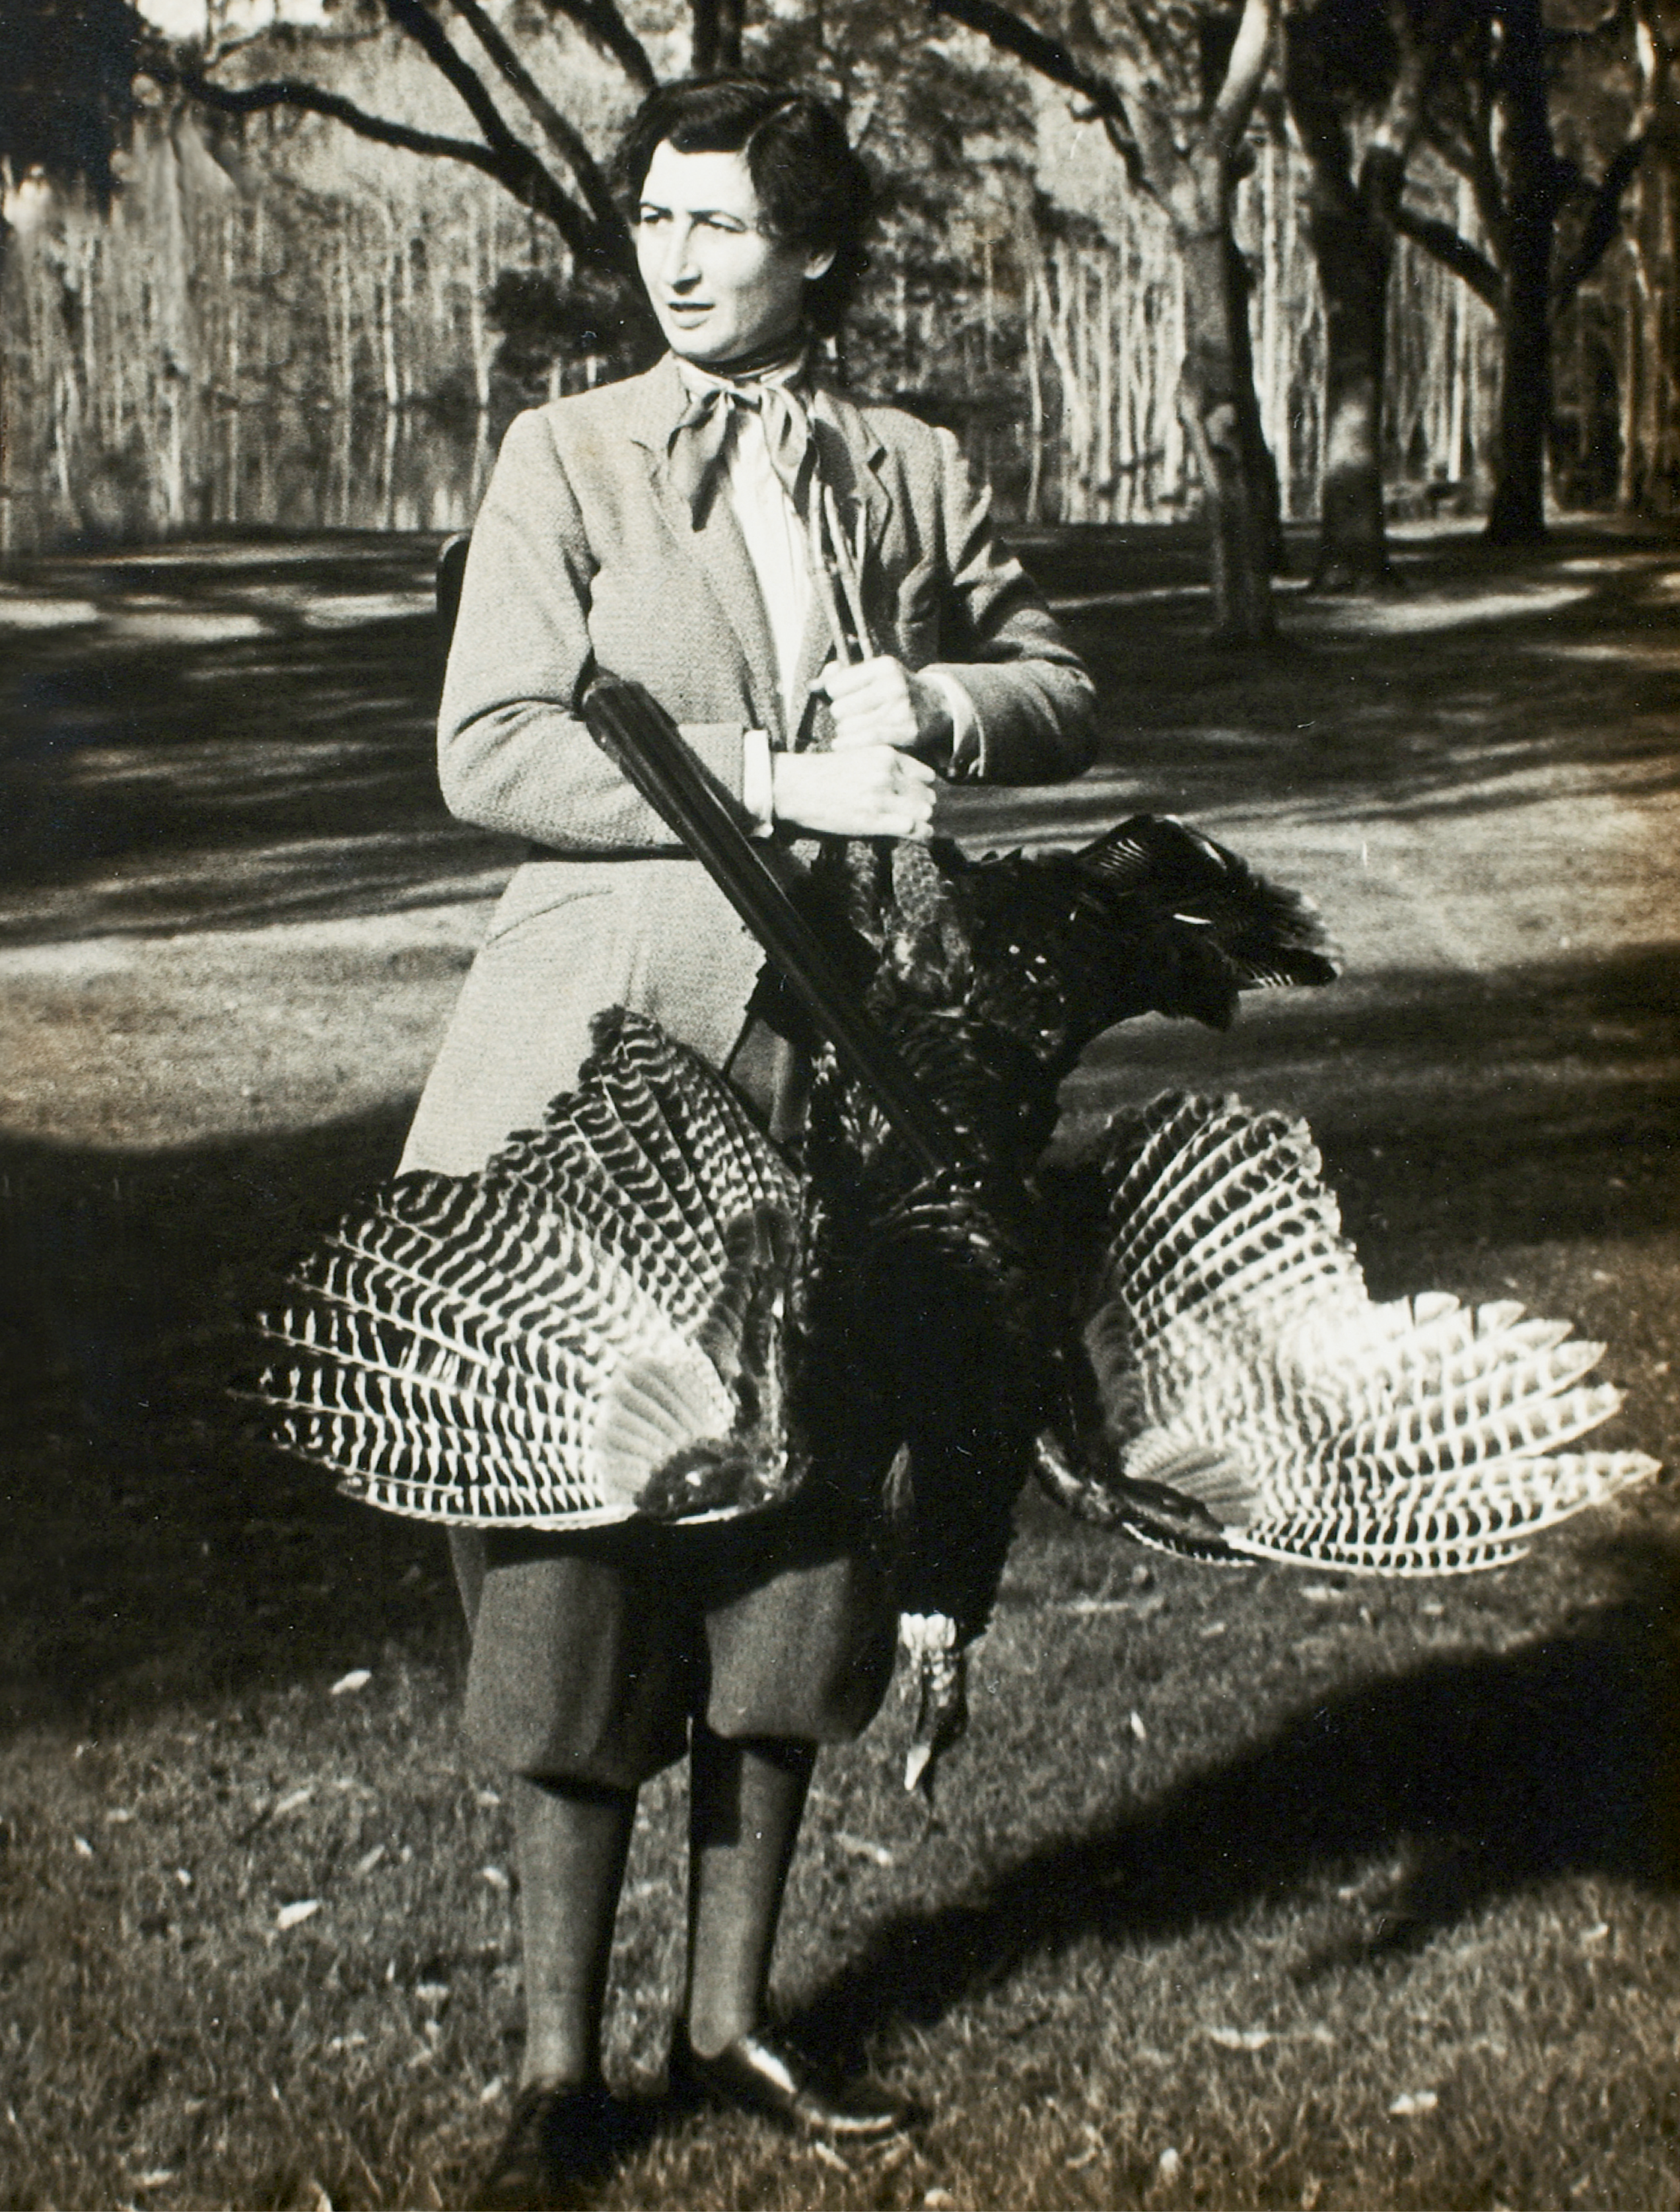 Belle Baruch during a 1936 turkey hunt at her family’s 16,000-acre winter retreat, Hobcaw Barony, near Georgetown, South Carolina; (opposite) the Baruchs, circa 1905, with staff and guests on the porch of “Old Relick,” the original main home on the property